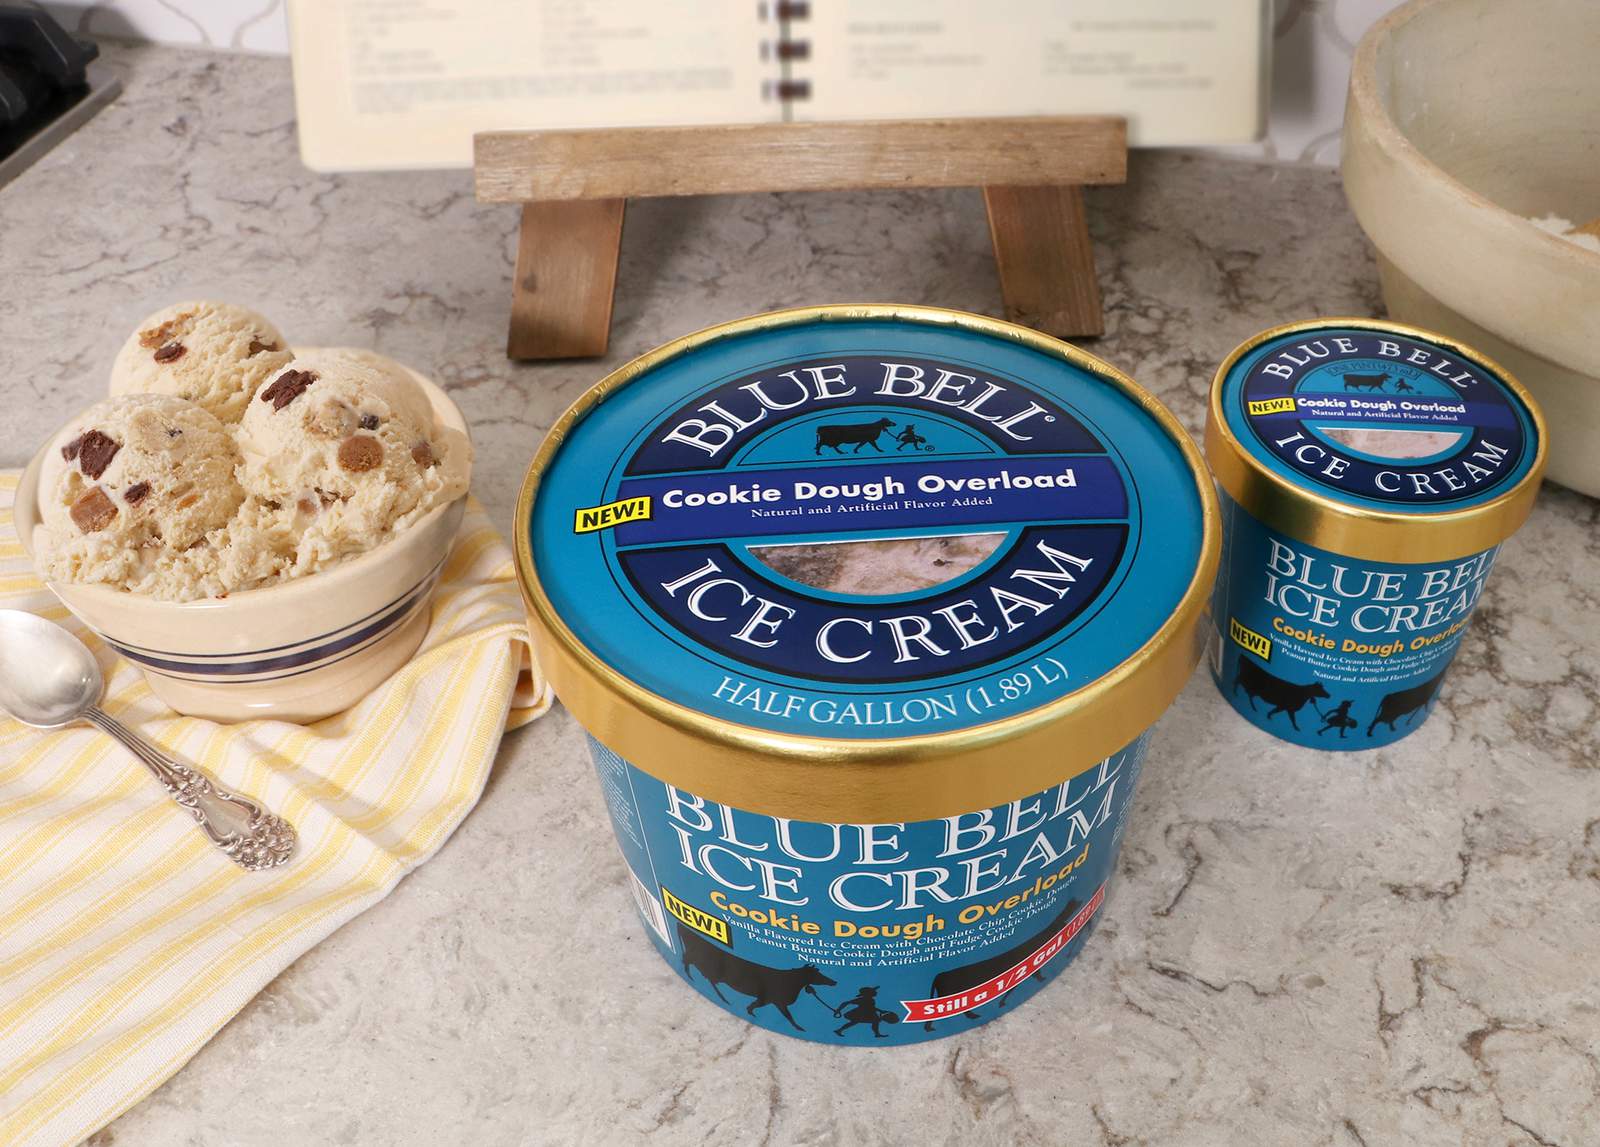 Blue Bell releases new ‘Cookie Dough Overload’ ice cream flavor